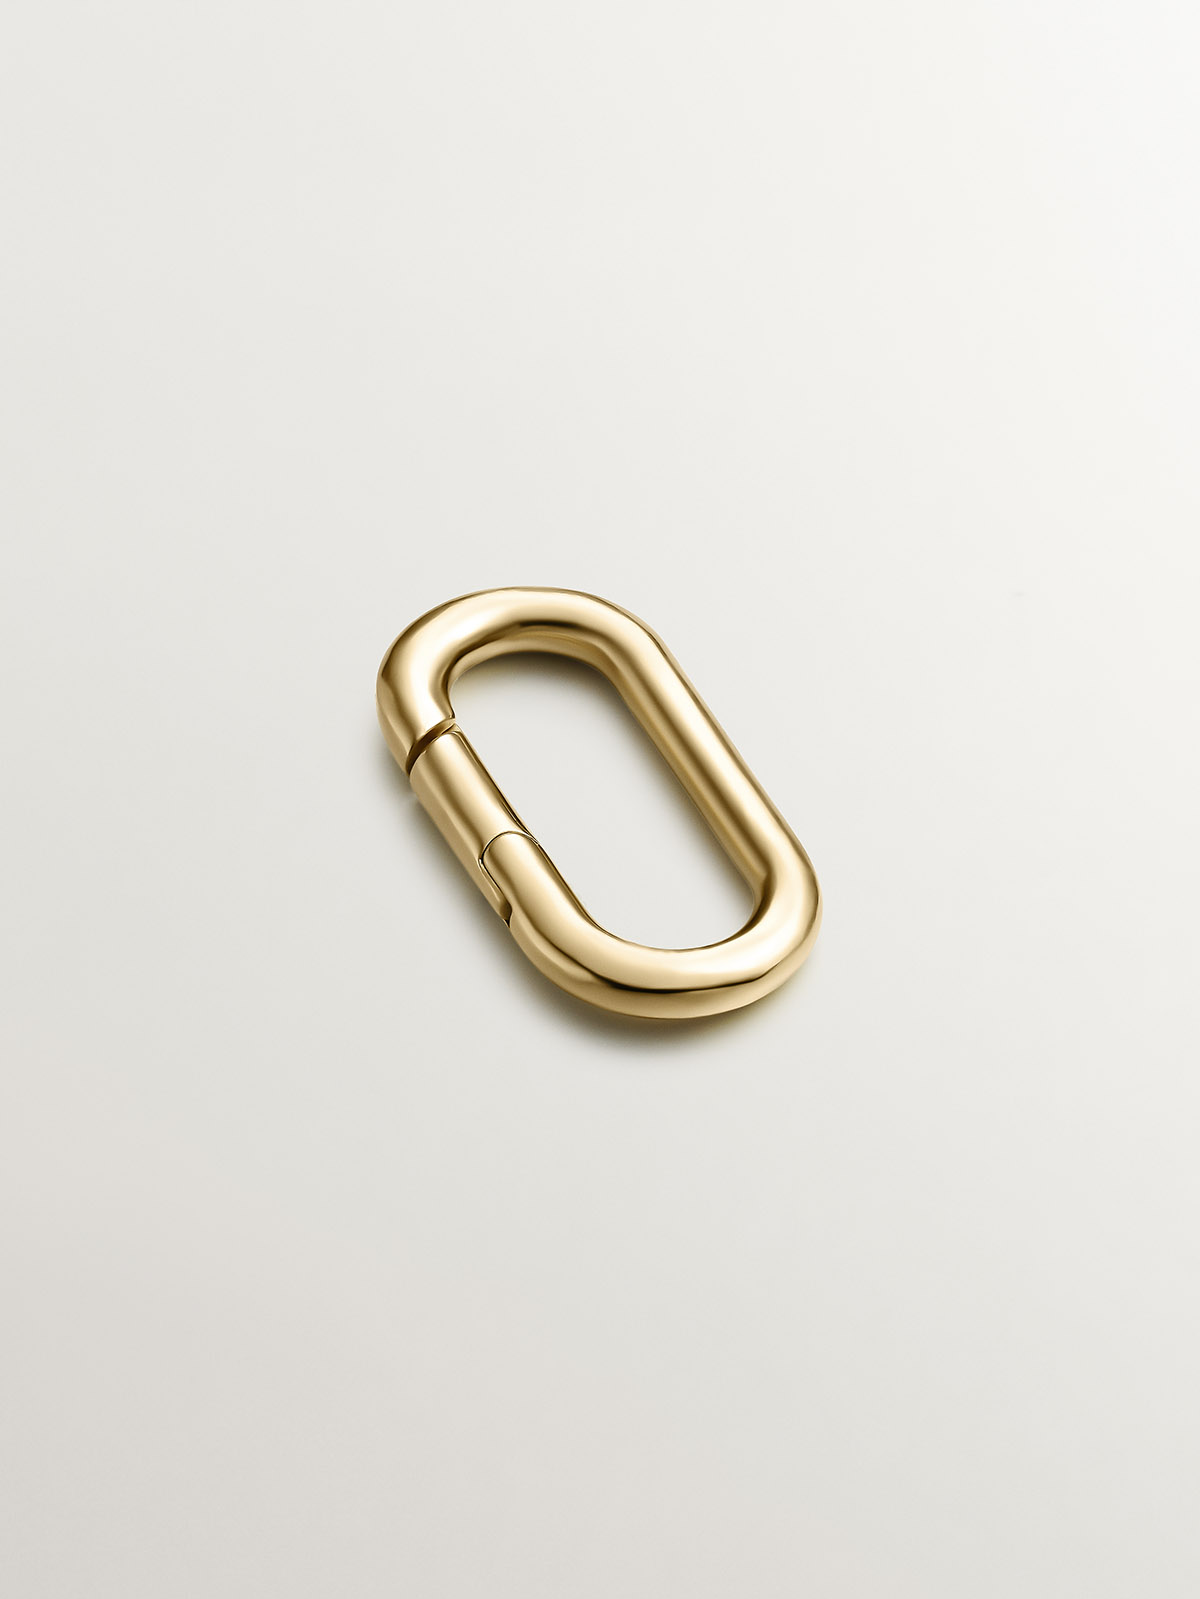 Oval carabiner in 925 silver coated in 18K yellow gold.